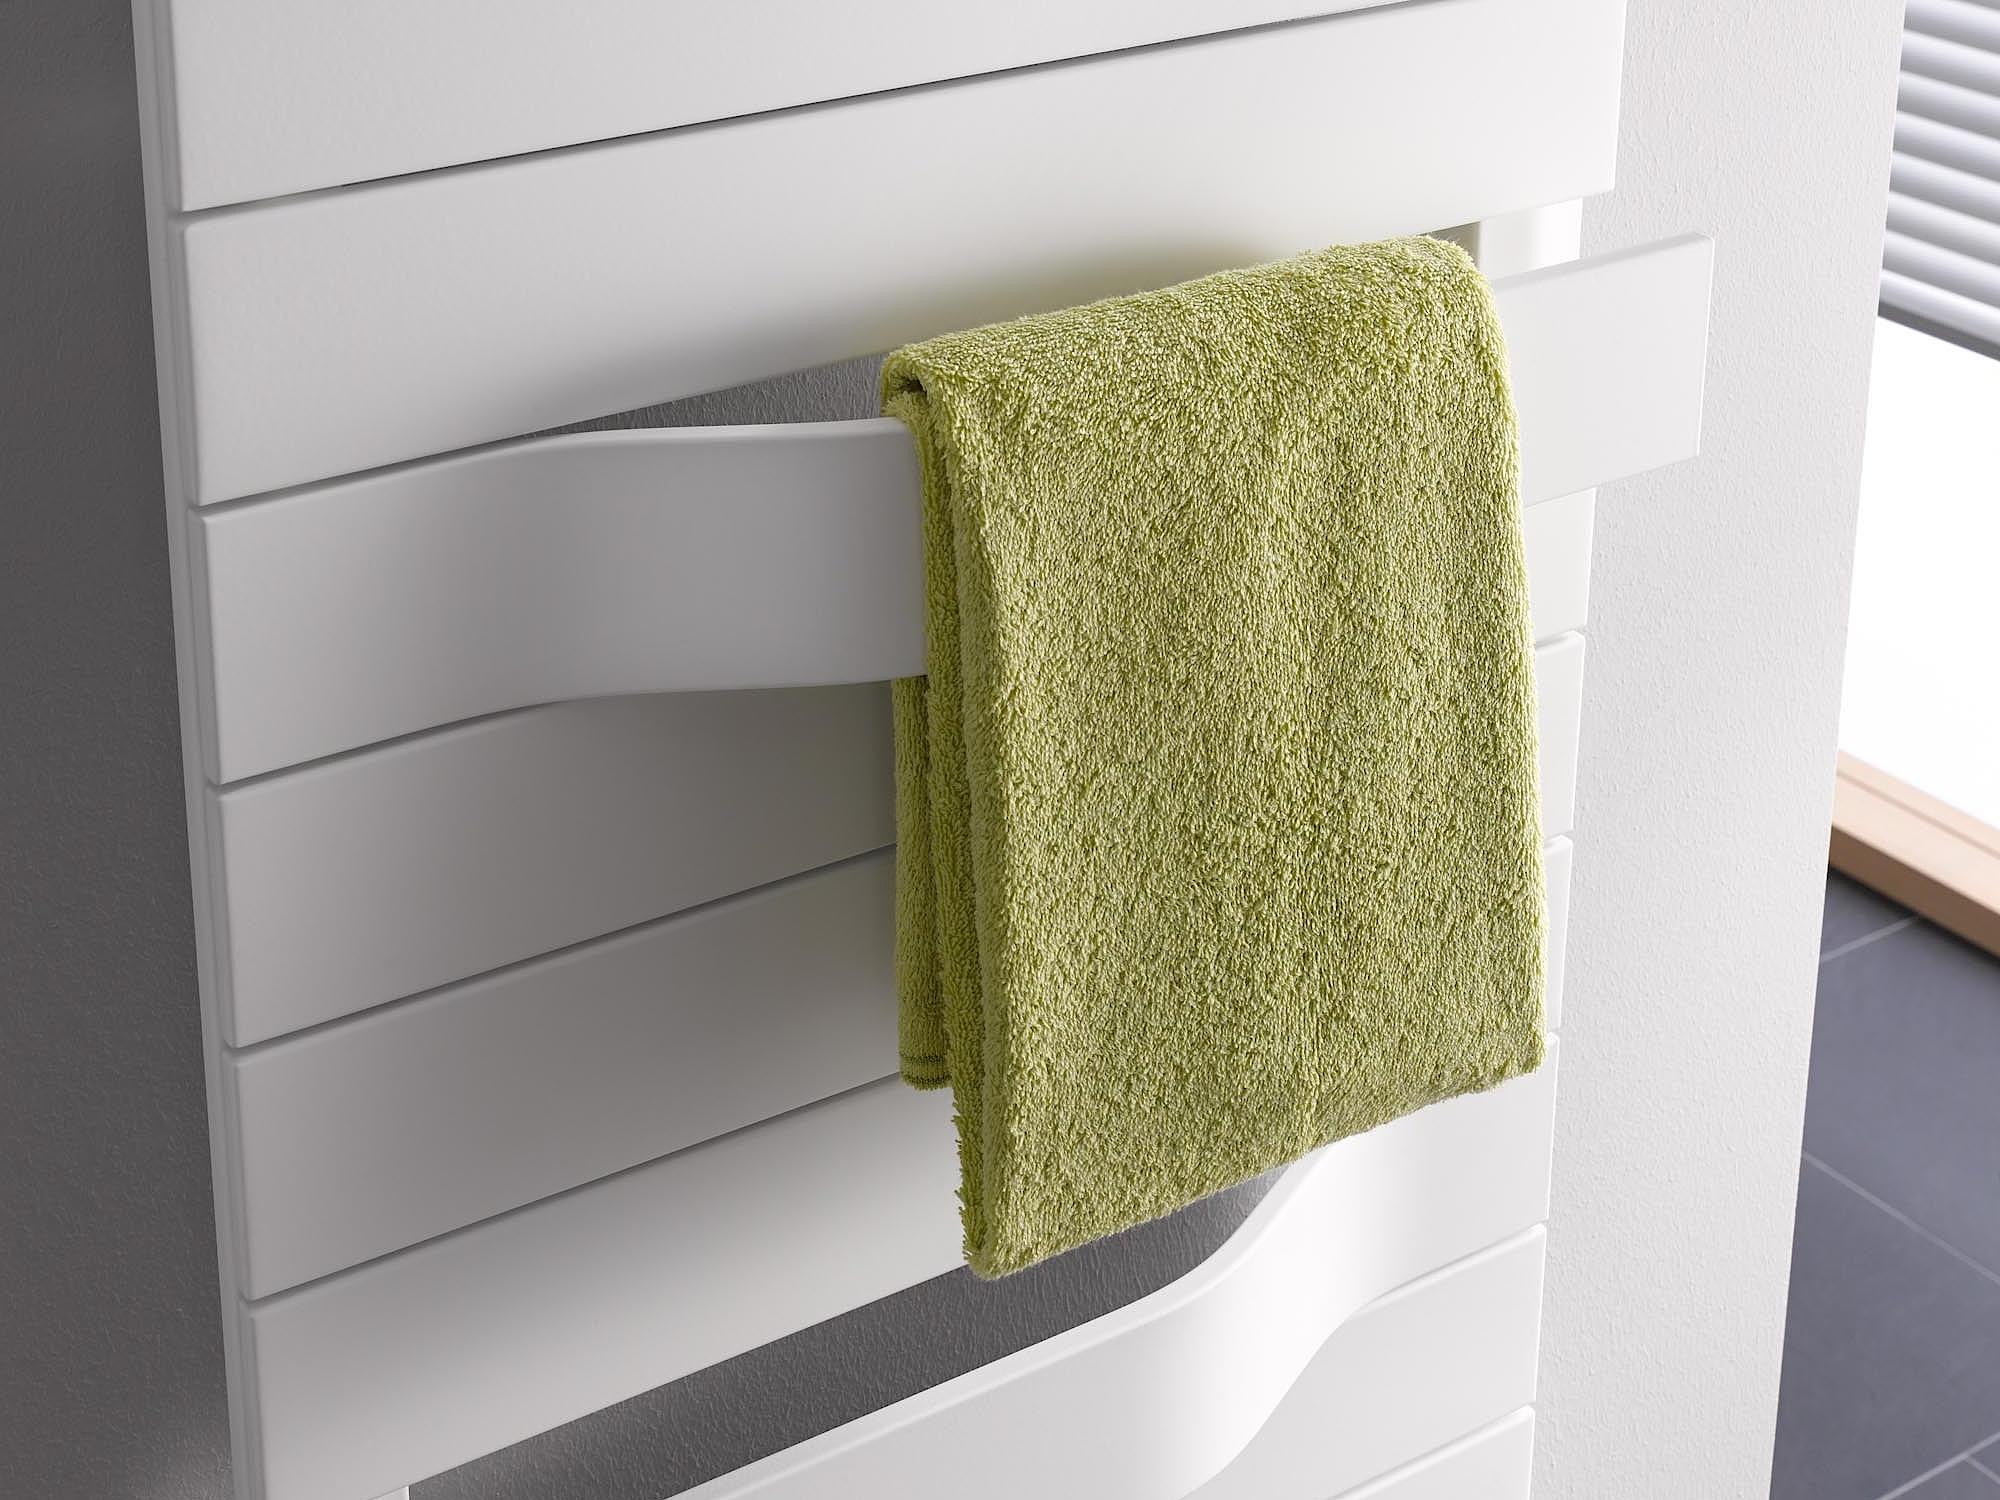 Kermi Tabeo design and bathroom radiators with towel rails that protrude dynamically from the surface.